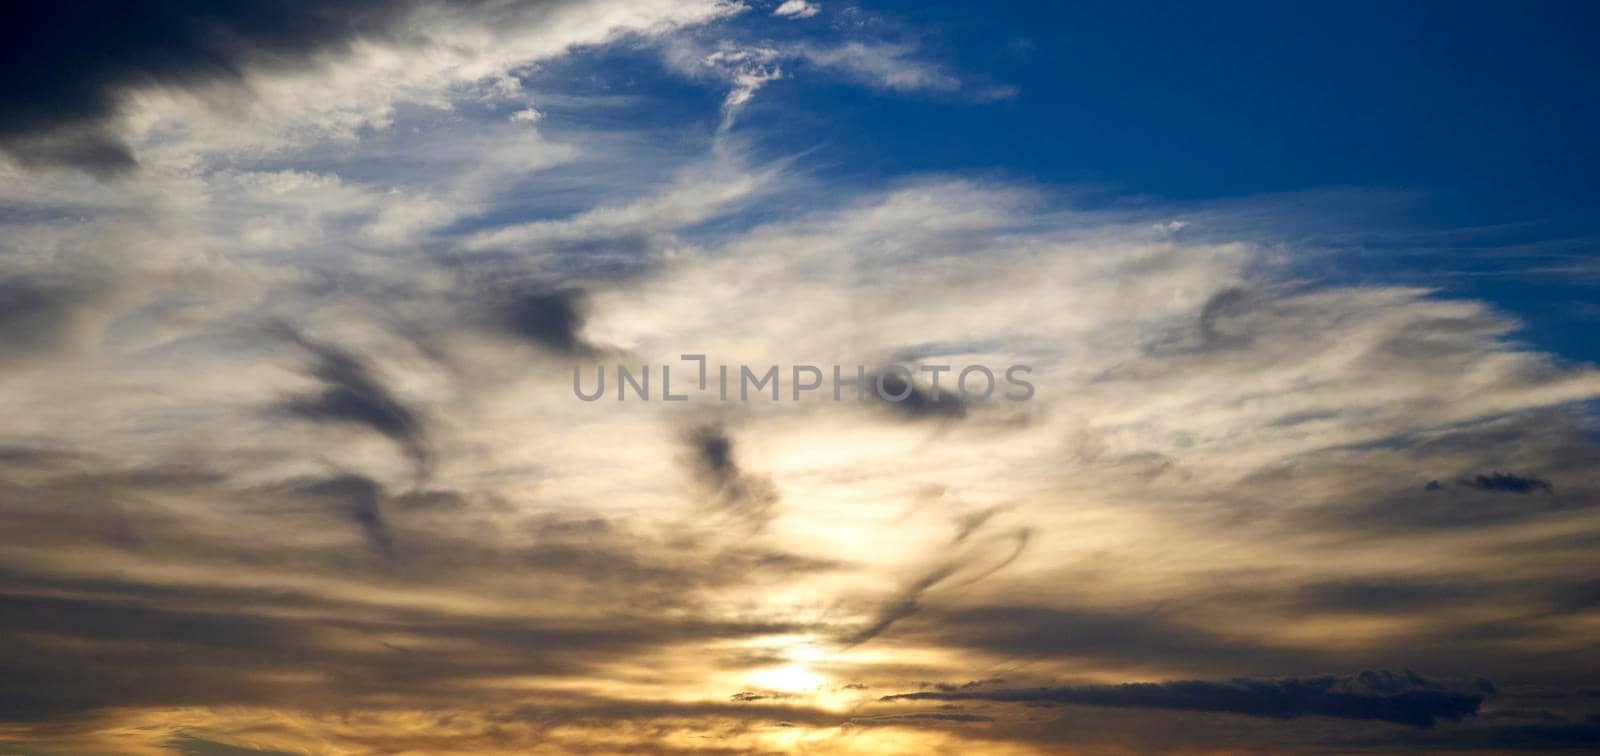 Sky full of clouds of different colors in a sunset by raul_ruiz